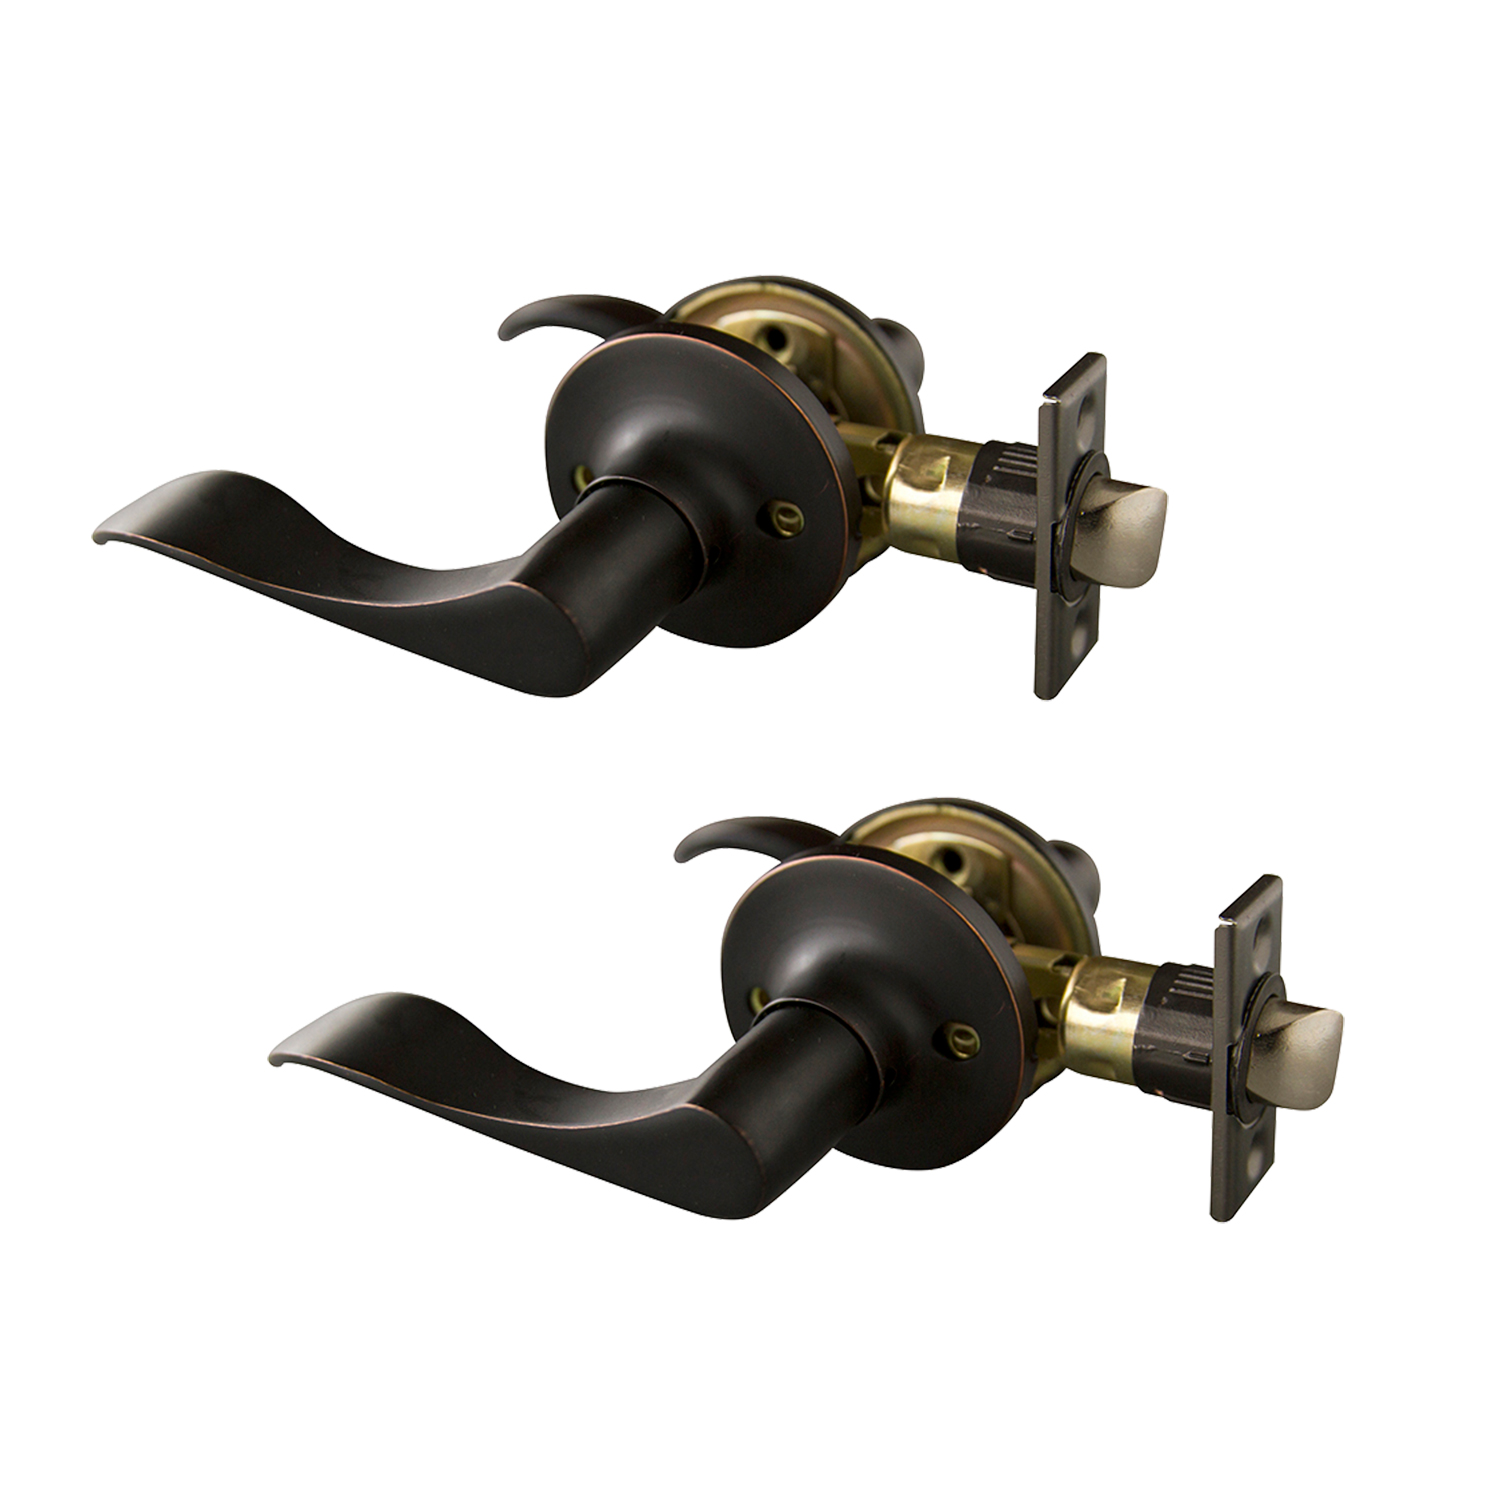 Design House 190512 Stratford 6-Way Universal Passage Hall and Closet Door Lever Oil Rubbed Bronze 2-Pack - image 1 of 16